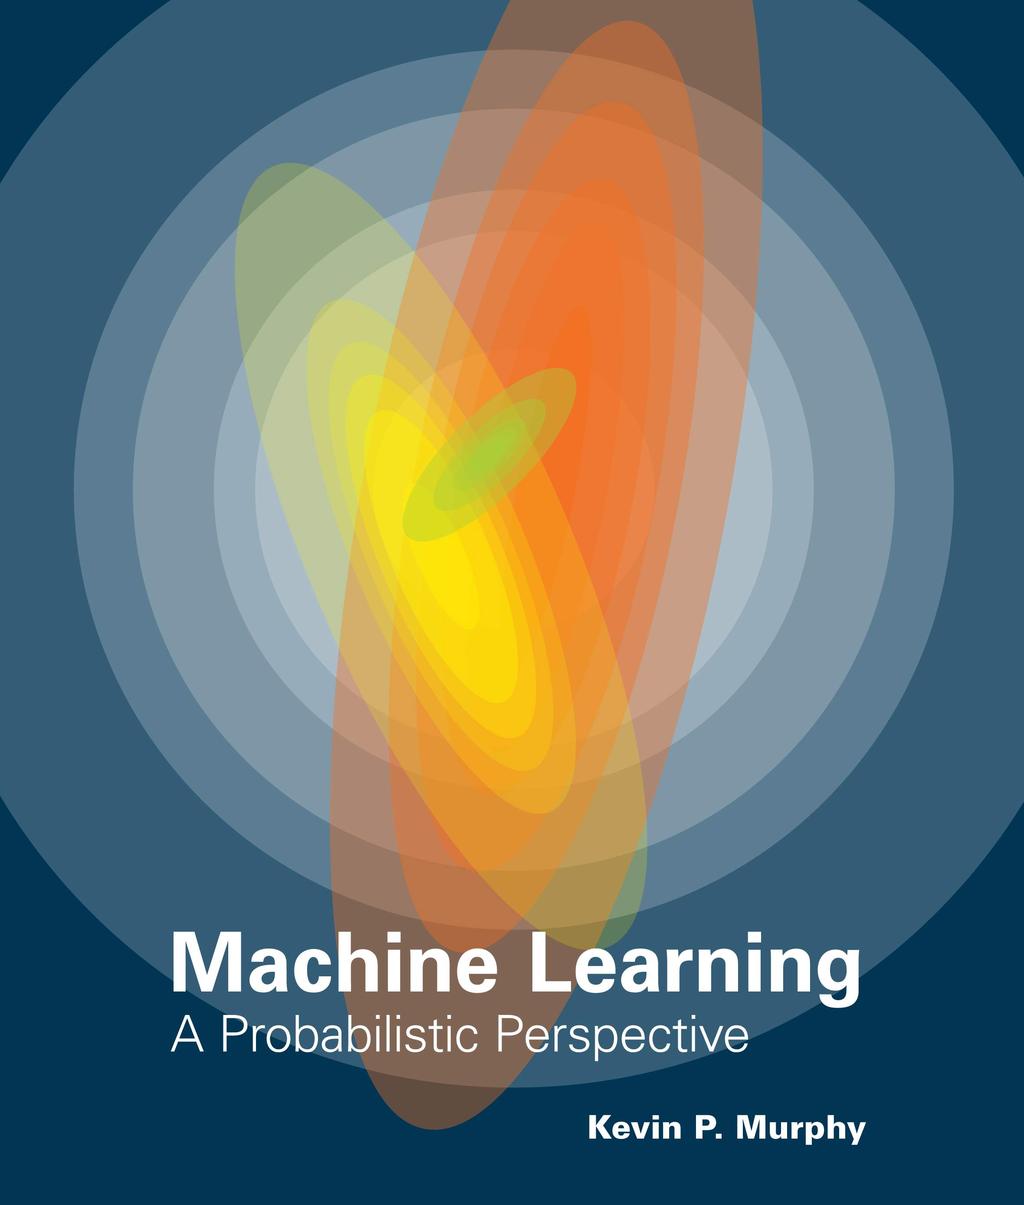 Textbook & Software Toolkit Kevin Murphy Machine Learning, A Probabilistic Perspective MATLAB software package: PMTK https://github.